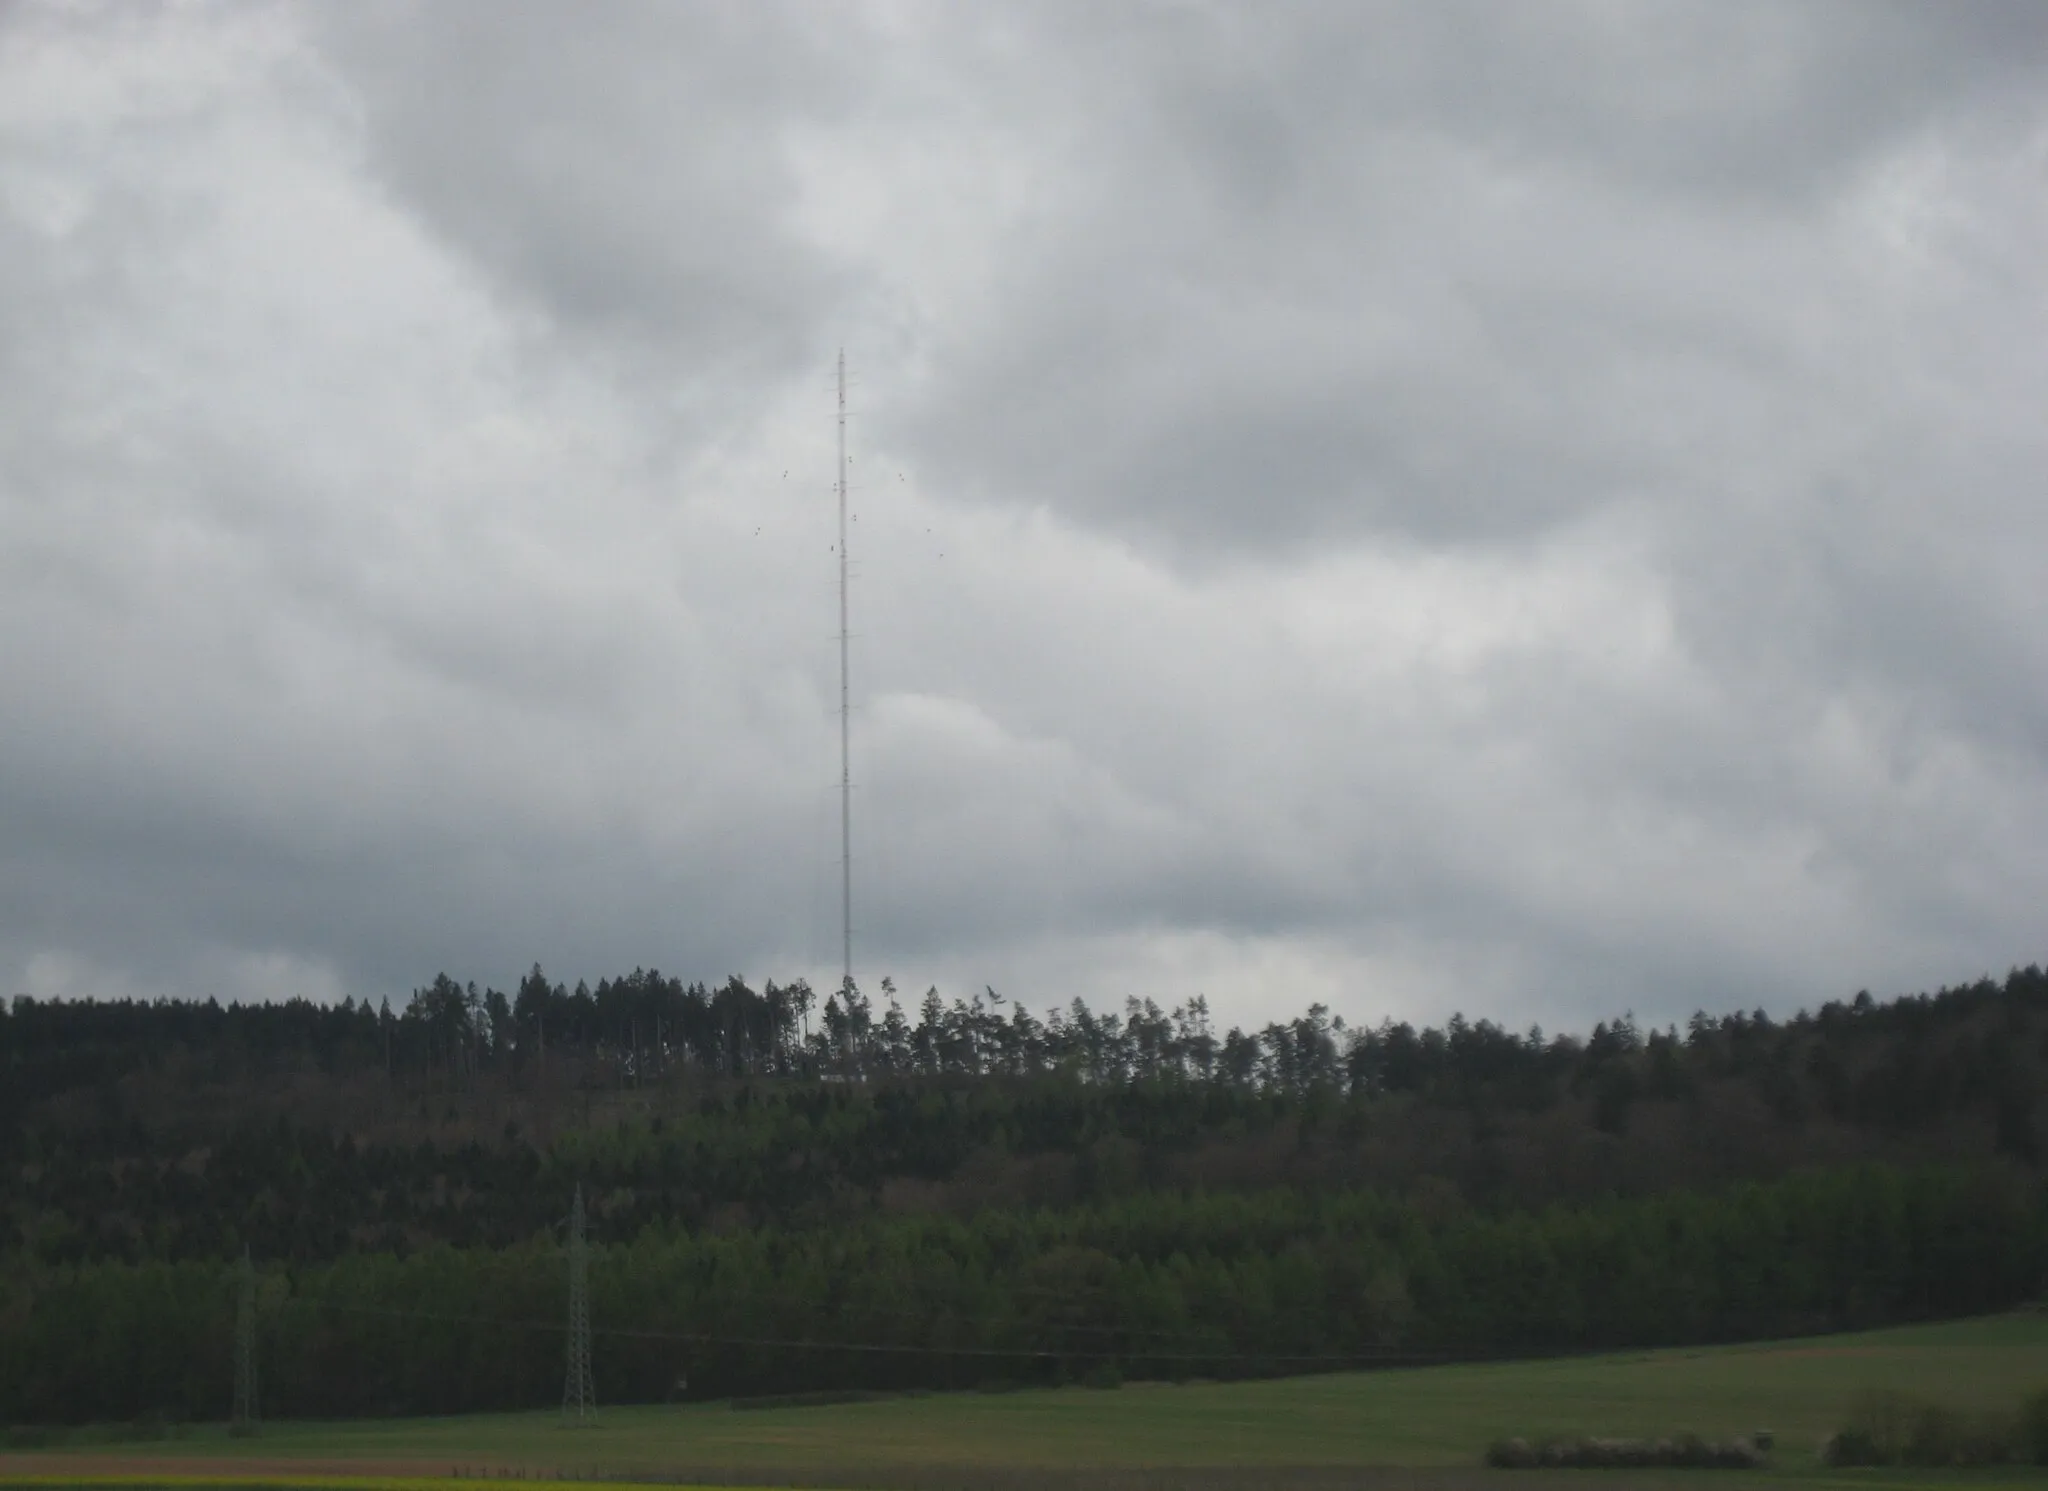 Photo showing: Rödeser Berg with a tower for measuring wind speeds in district Kassel, Hesse, Germany.